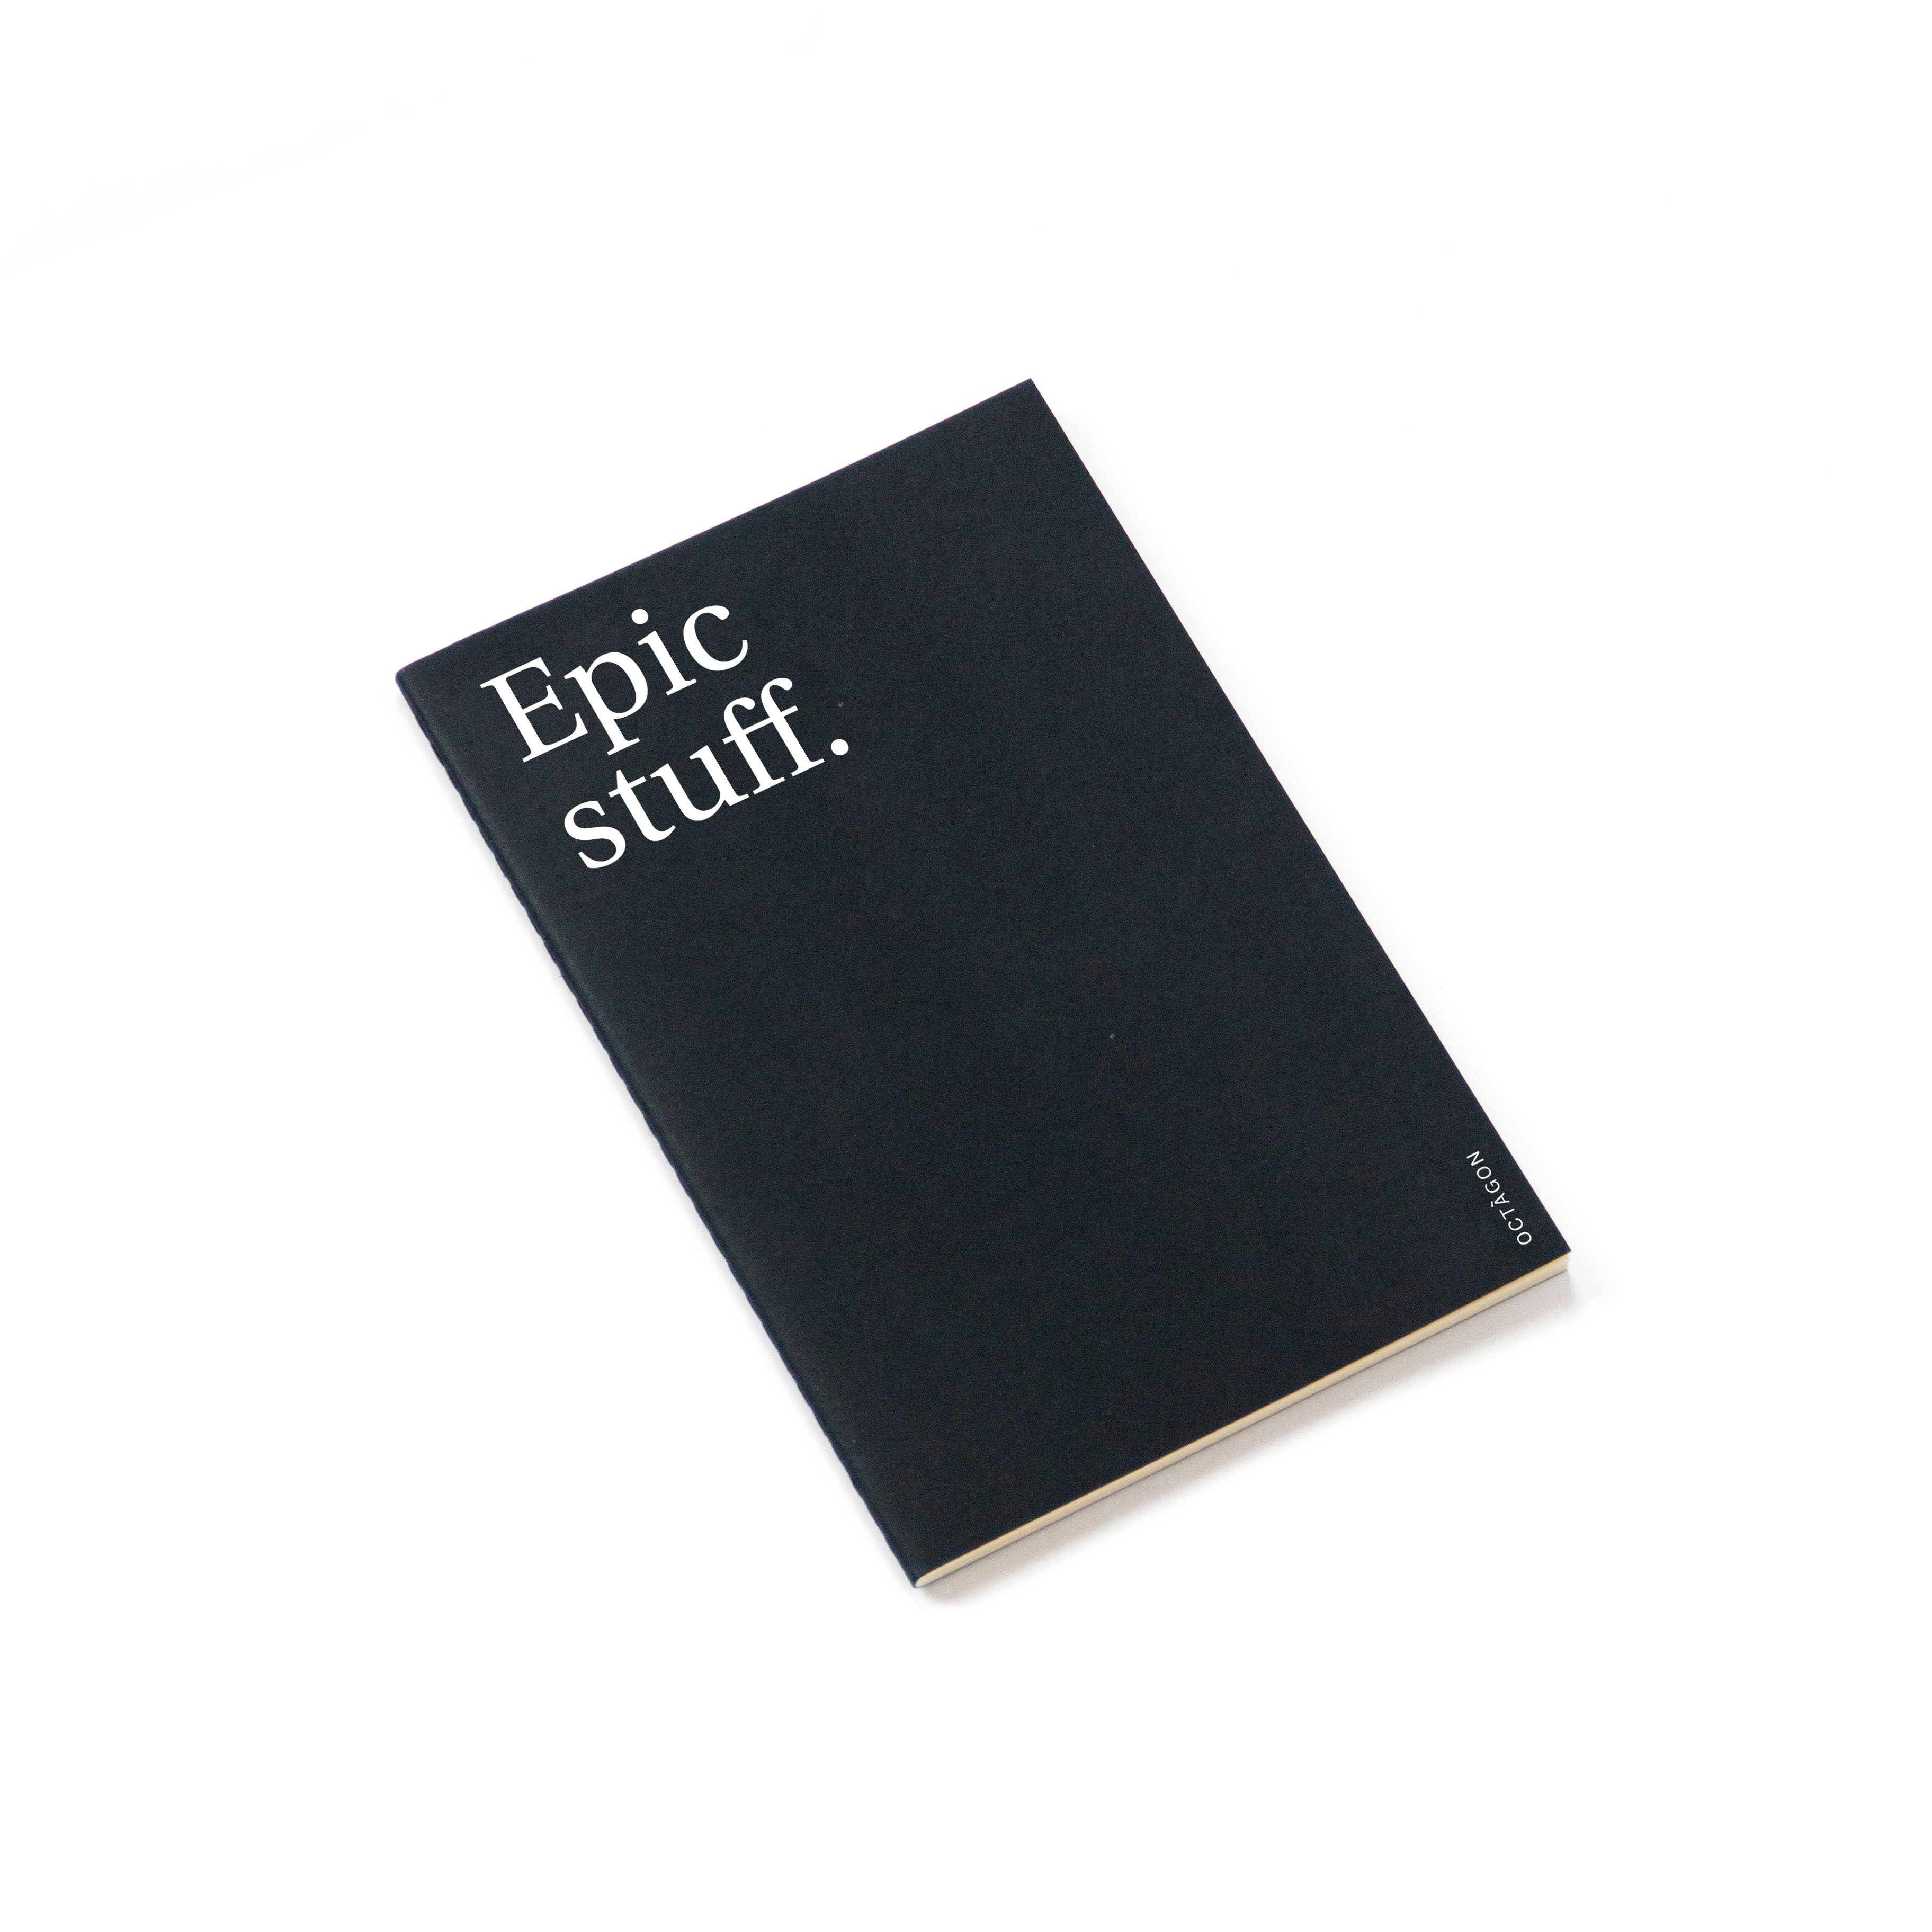 &quot;Epic stuff&quot; thin notebook. Cover black color and white typography.